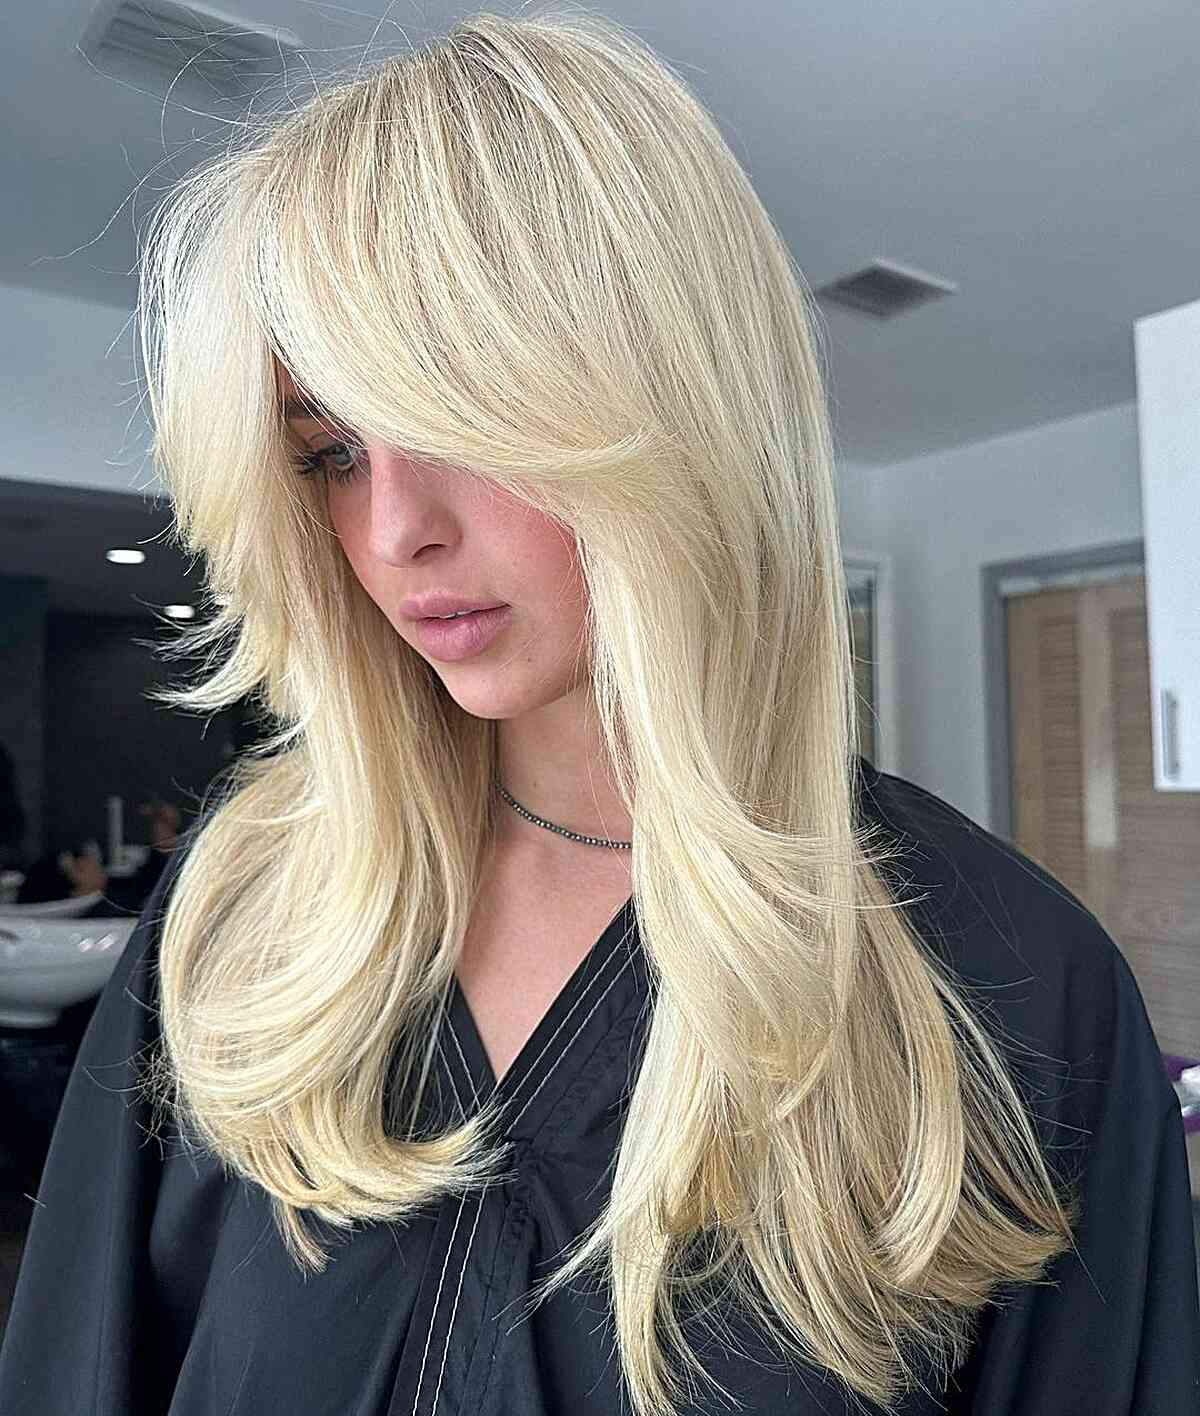 The Perfect Summer Light Blonde Hair Color for women with medium hair and curtain bangs